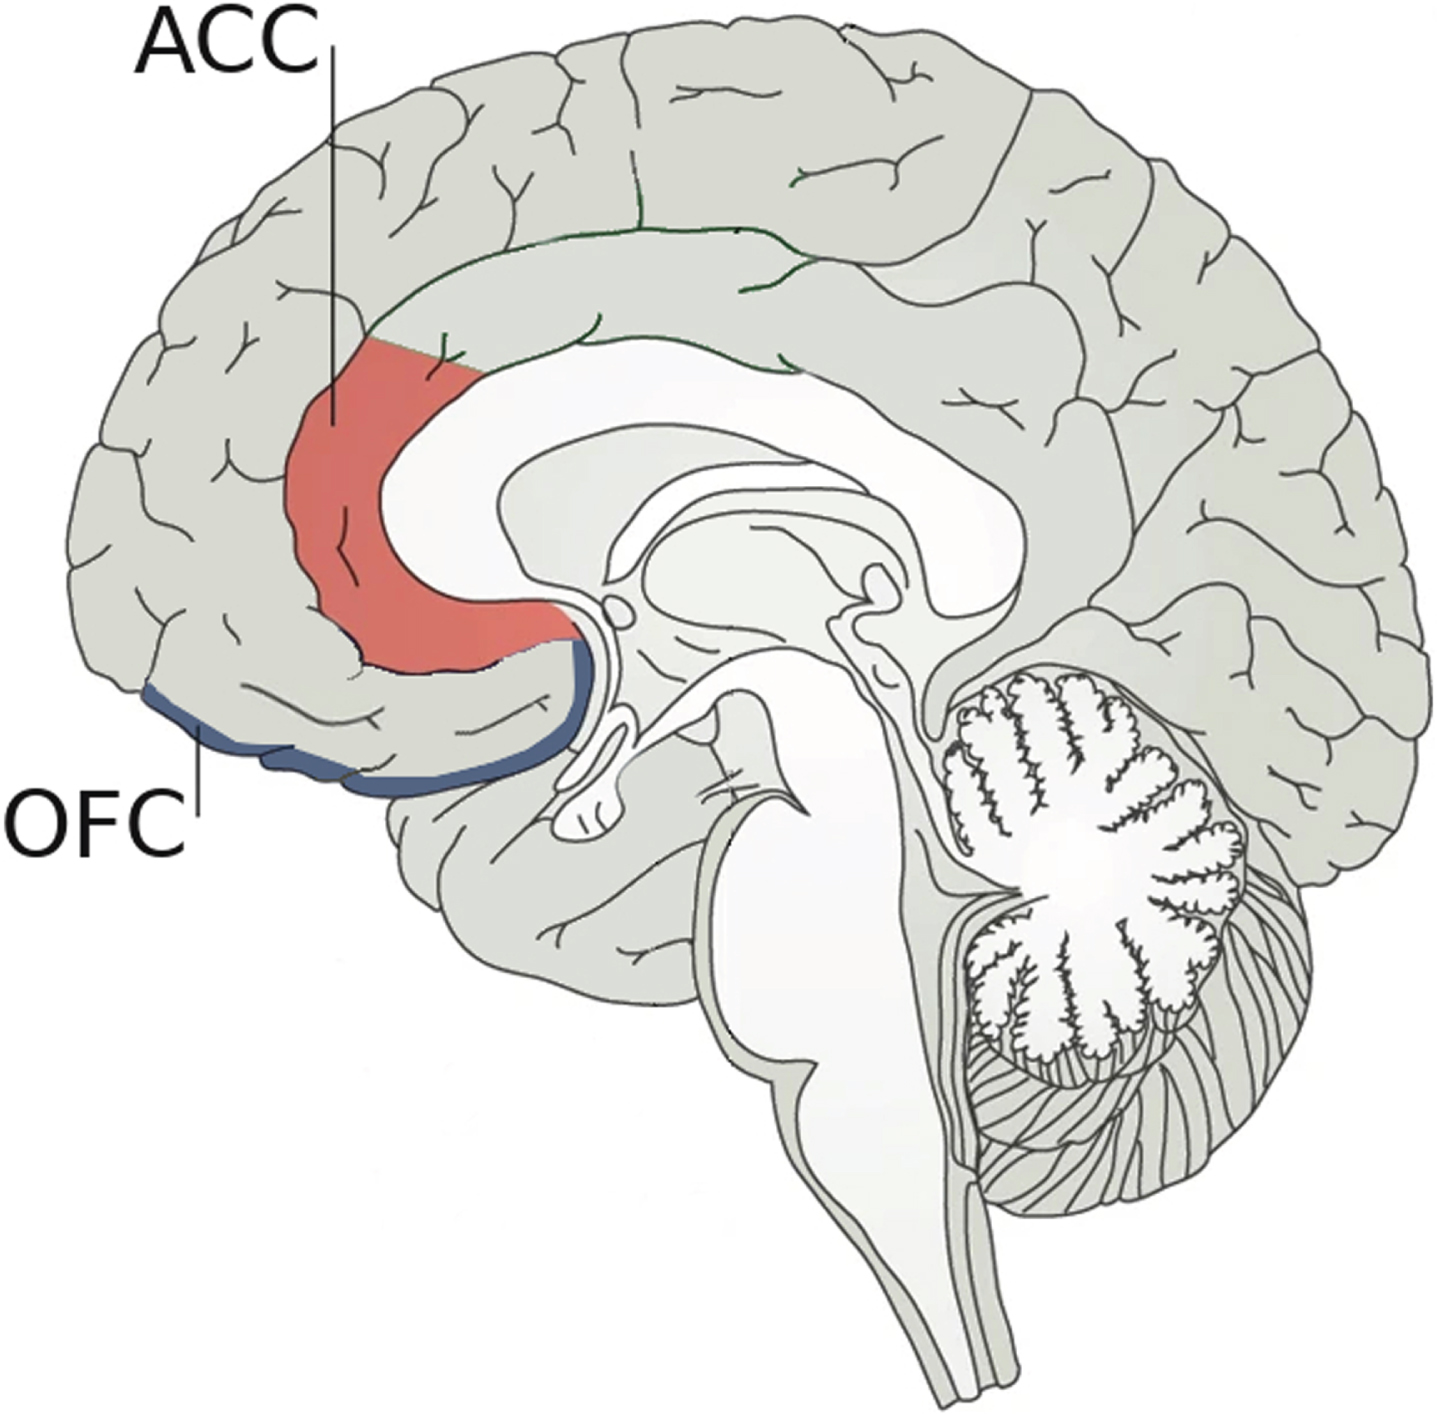 Neuroanatomical bases underlying social decision-making. Social decision-making, which is crucial to establishing and maintaining successful social relationships, is supported by two pivotal brain regions: 1) the anterior cingulate cortex (ACC) that plays an important role in the ability to recognize emotions by evaluating predictions about the emotional states of others; and 2) the orbital frontal cortex (OFC) that judges the possible choices of behavior. Damage in any of these two areas could affect social cognition.